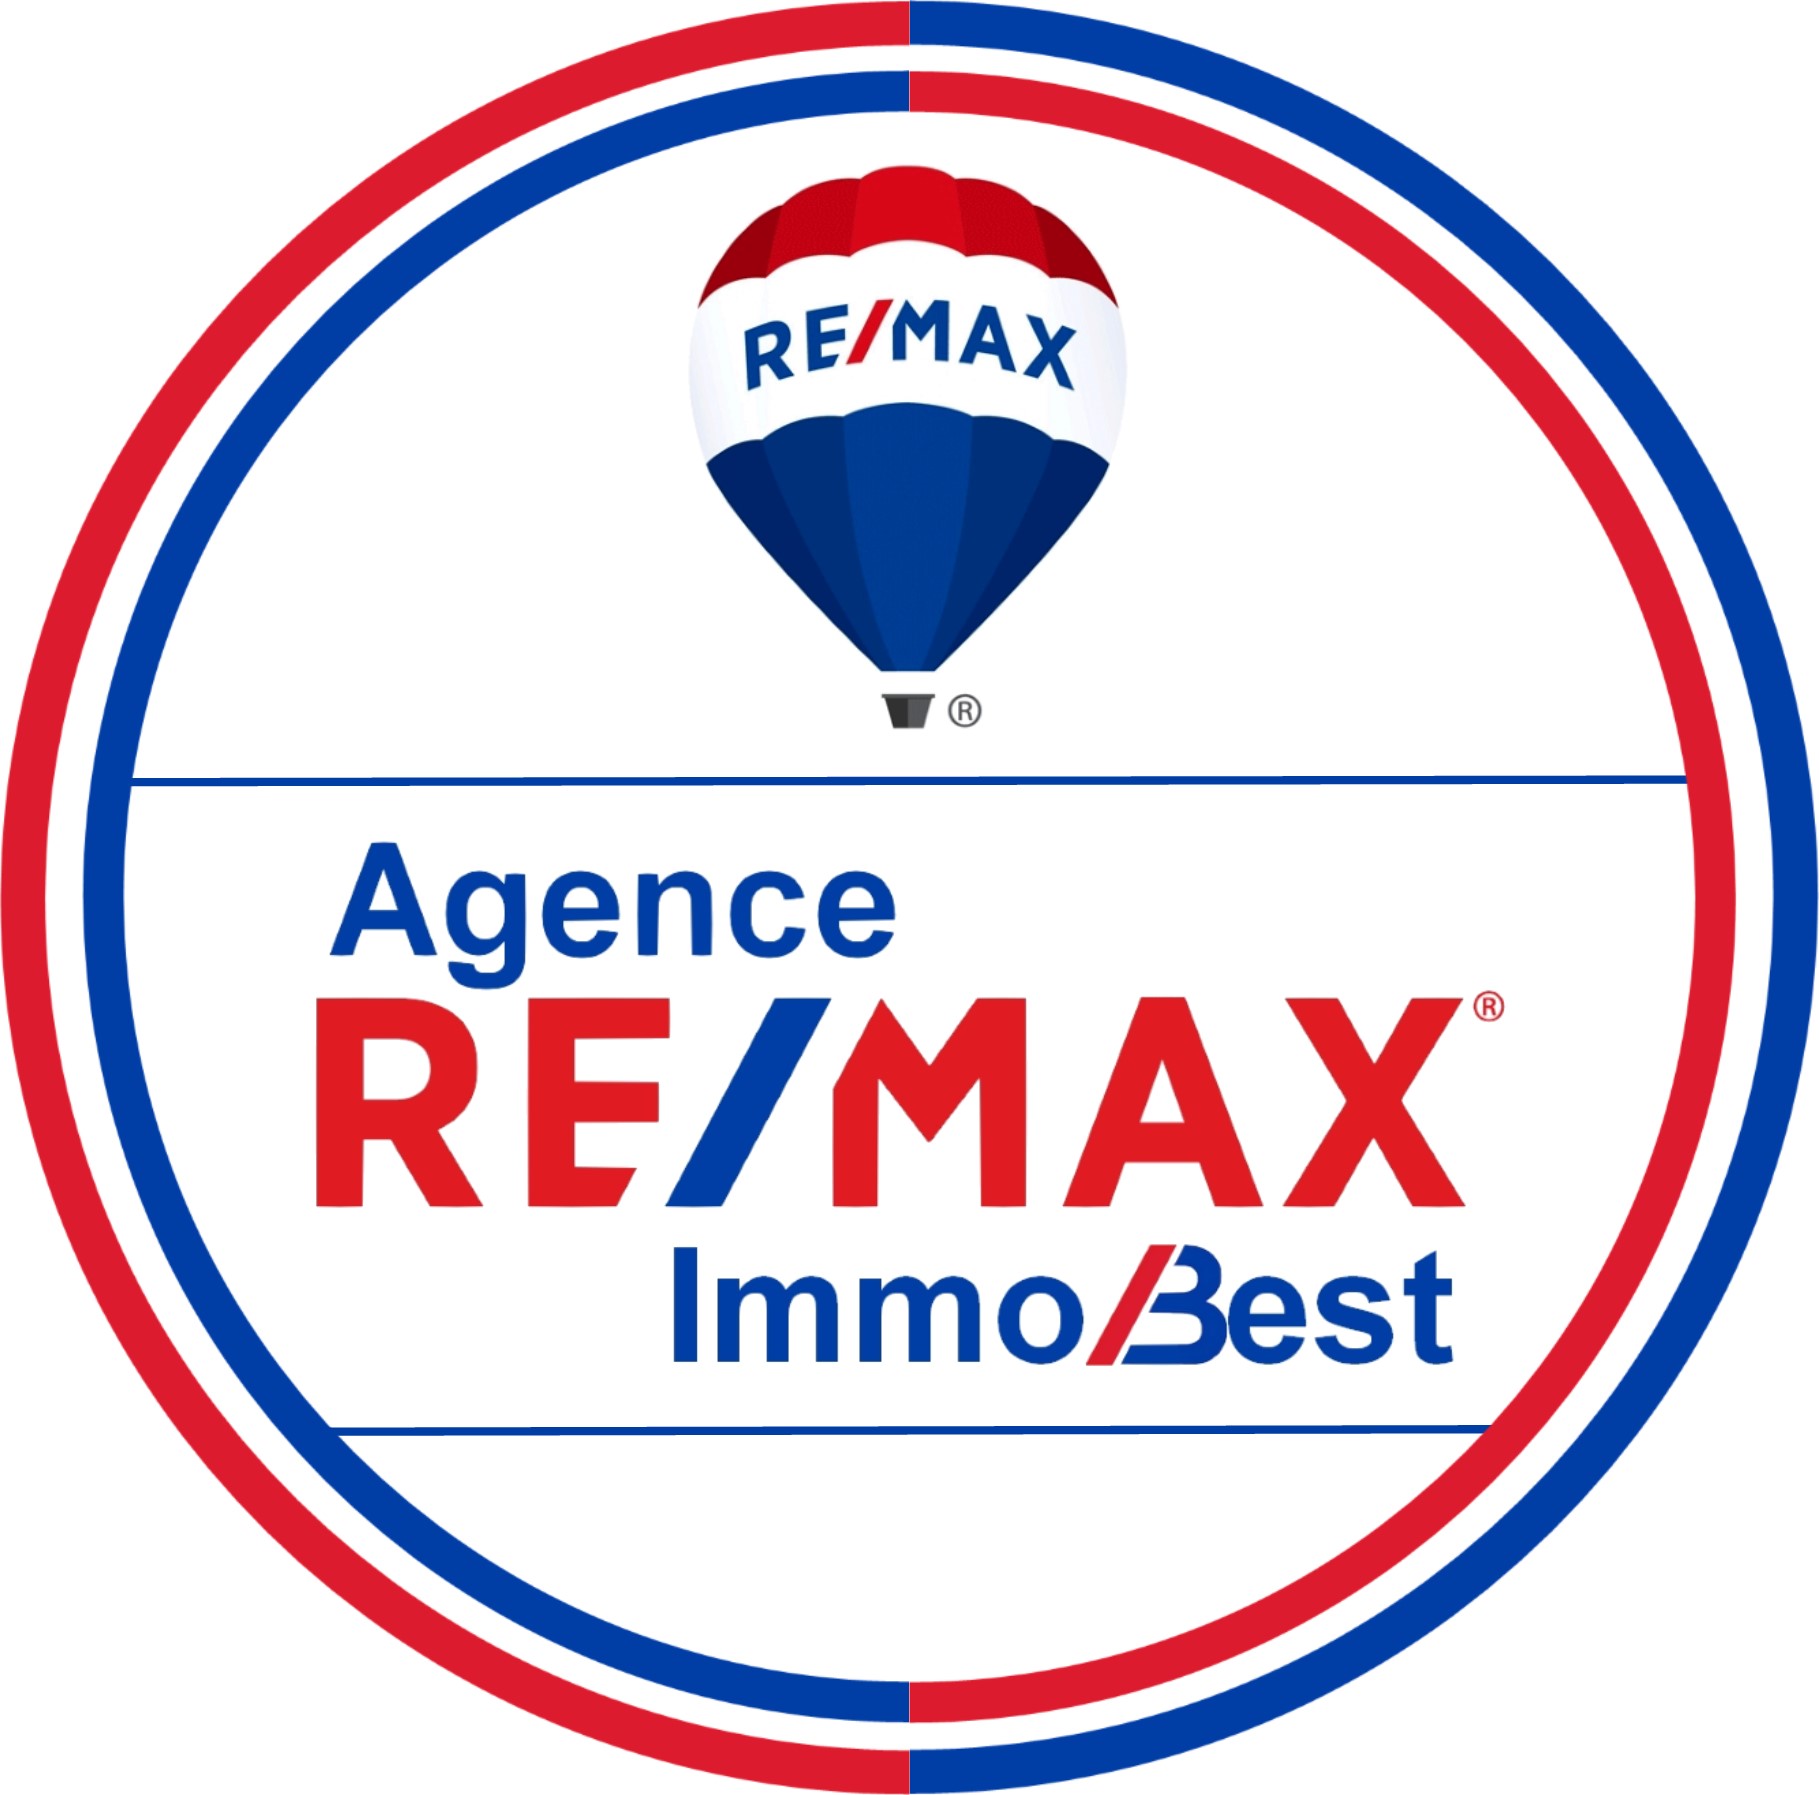 Agence immobilière à Colombes Agence Remax Immobest